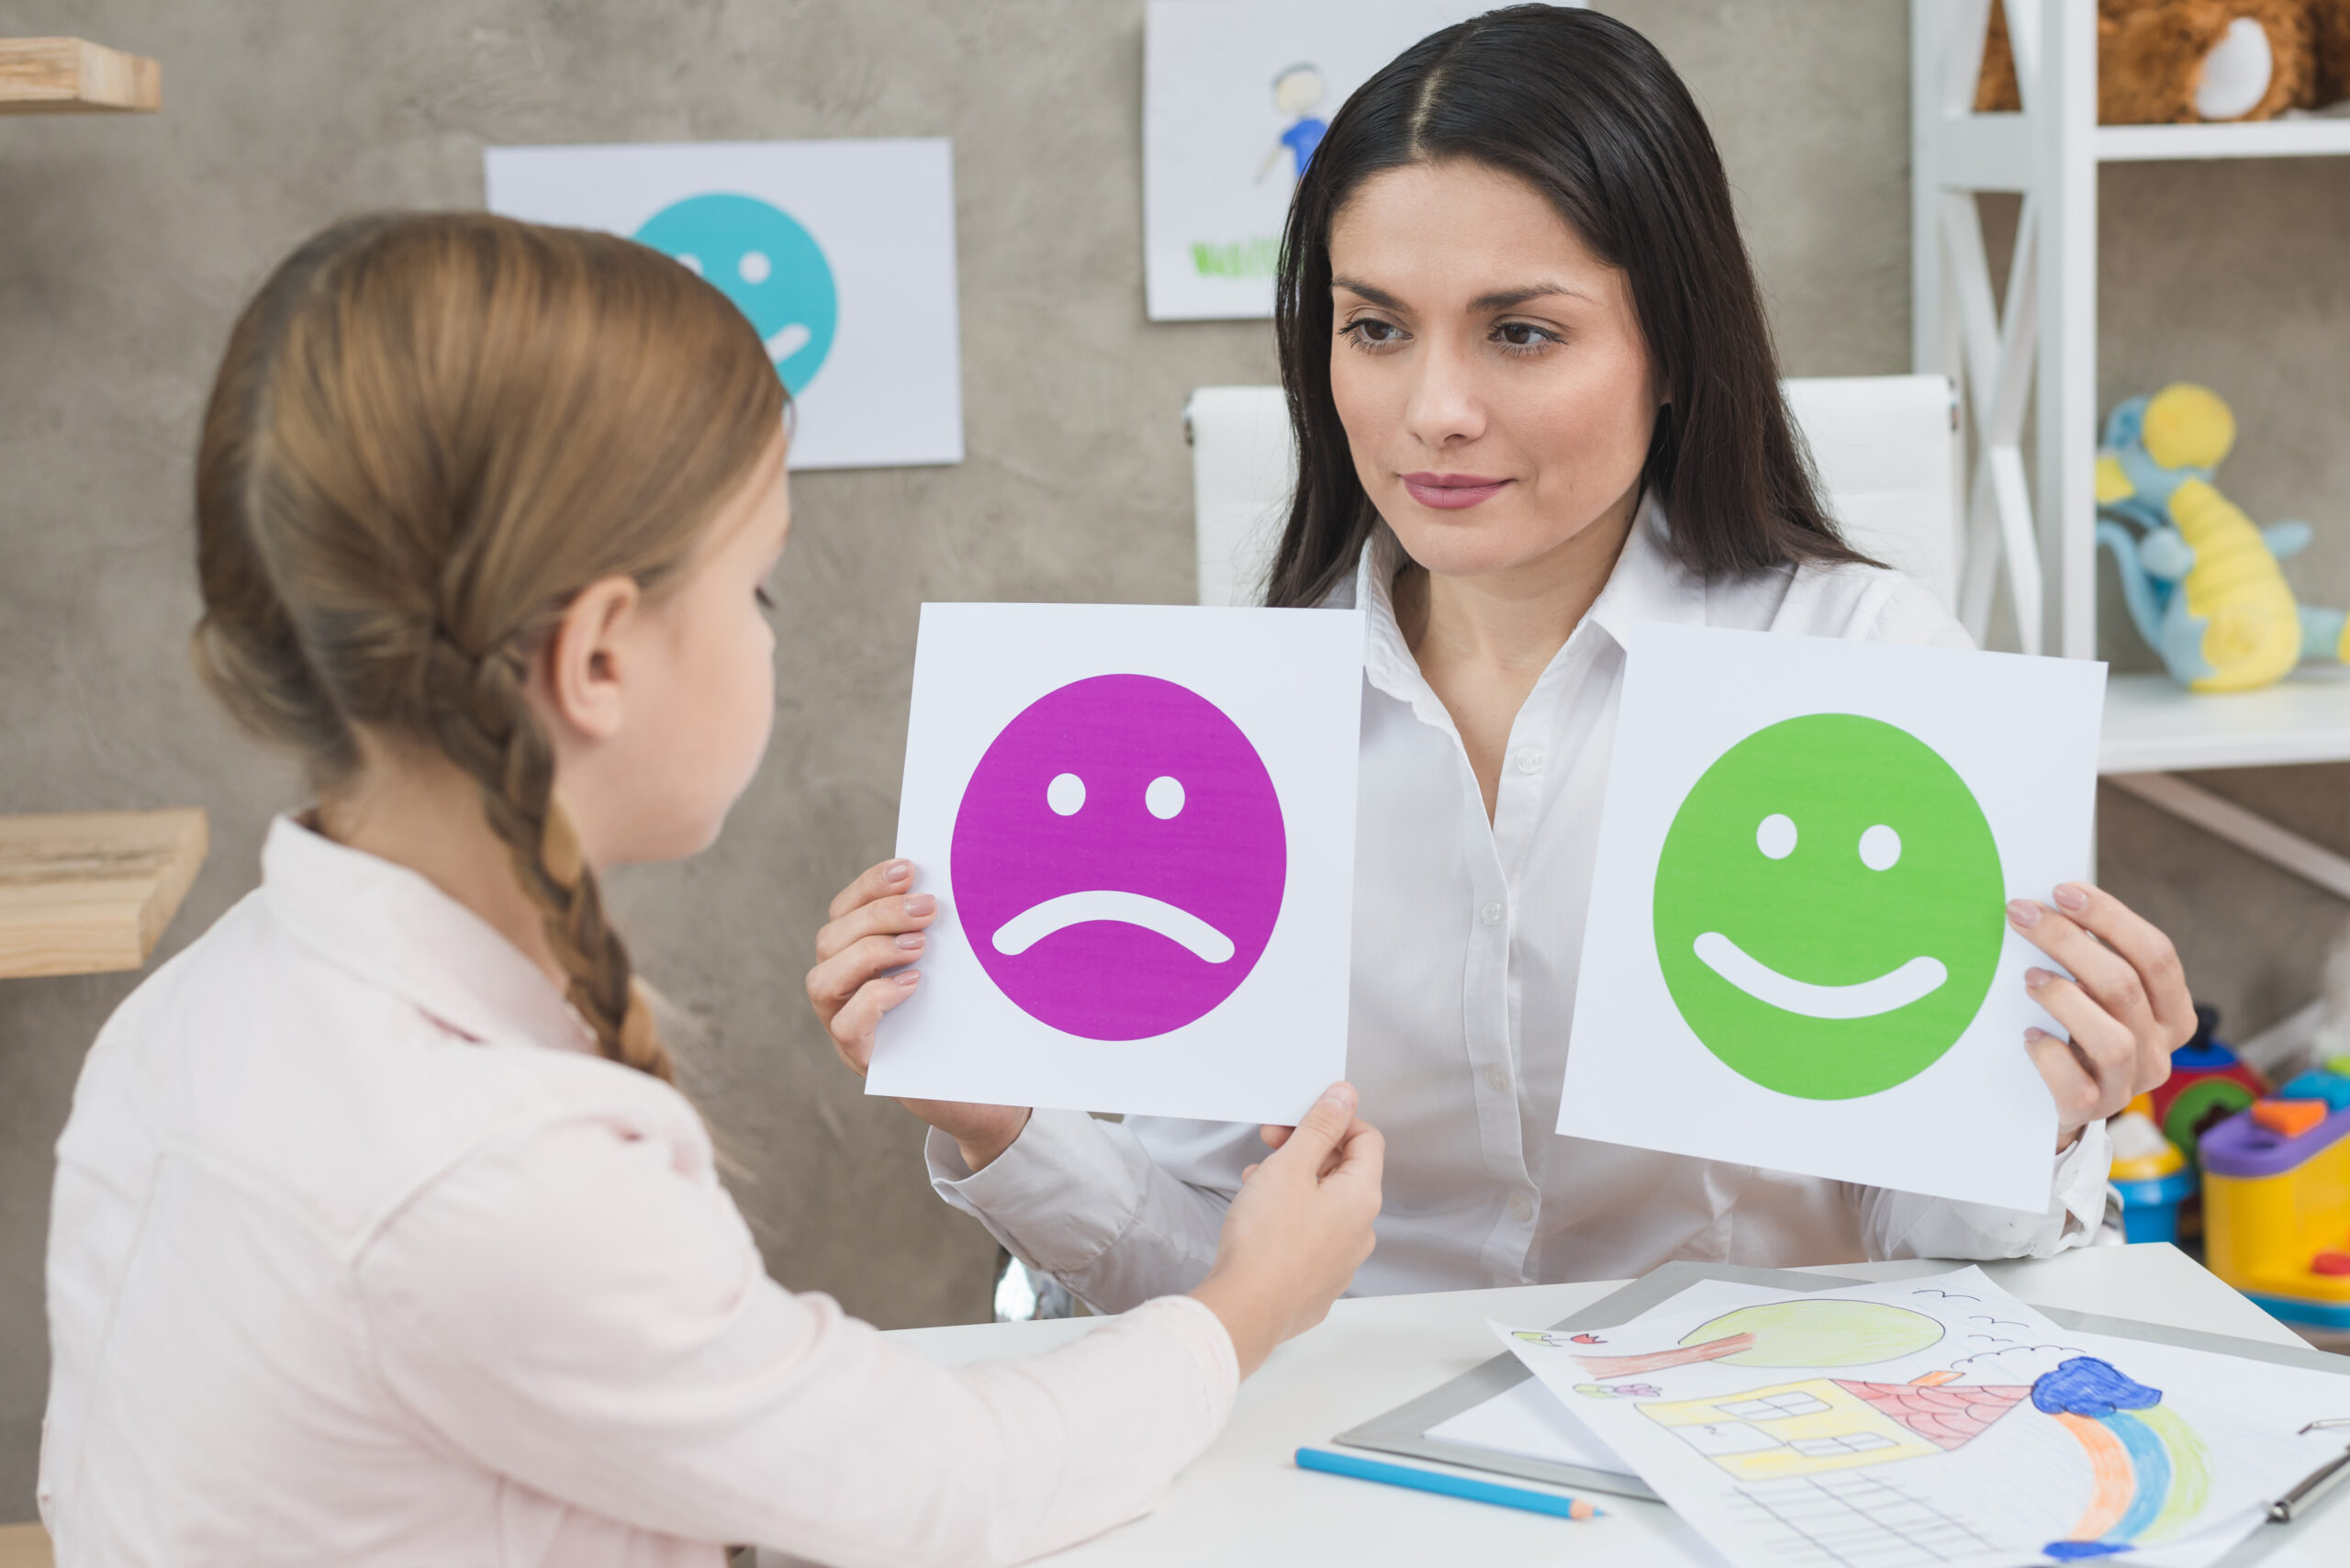 close-up-girl-choosing-sad-face-emoticons-paper-held-by-smiling-young-psychologist